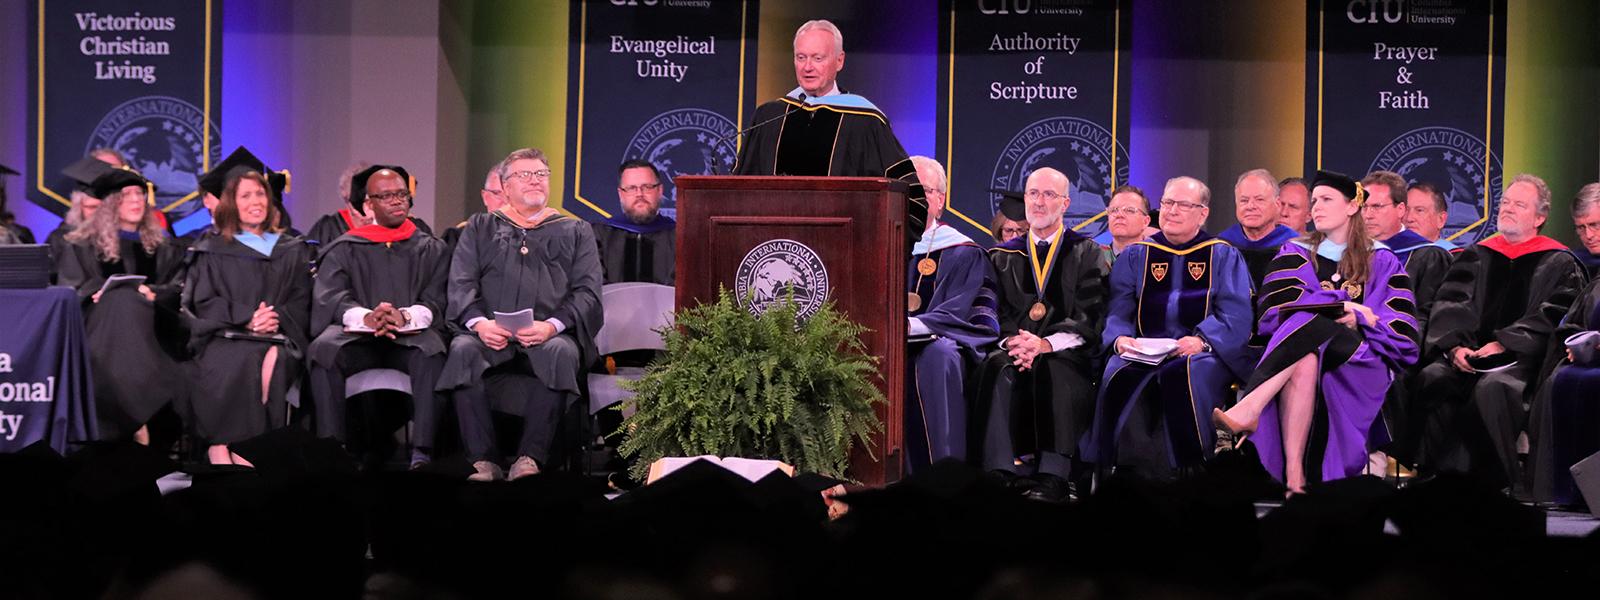 CIU alumnus and former CIU administrator Dr. Ralph Enlow was commencement speaker.